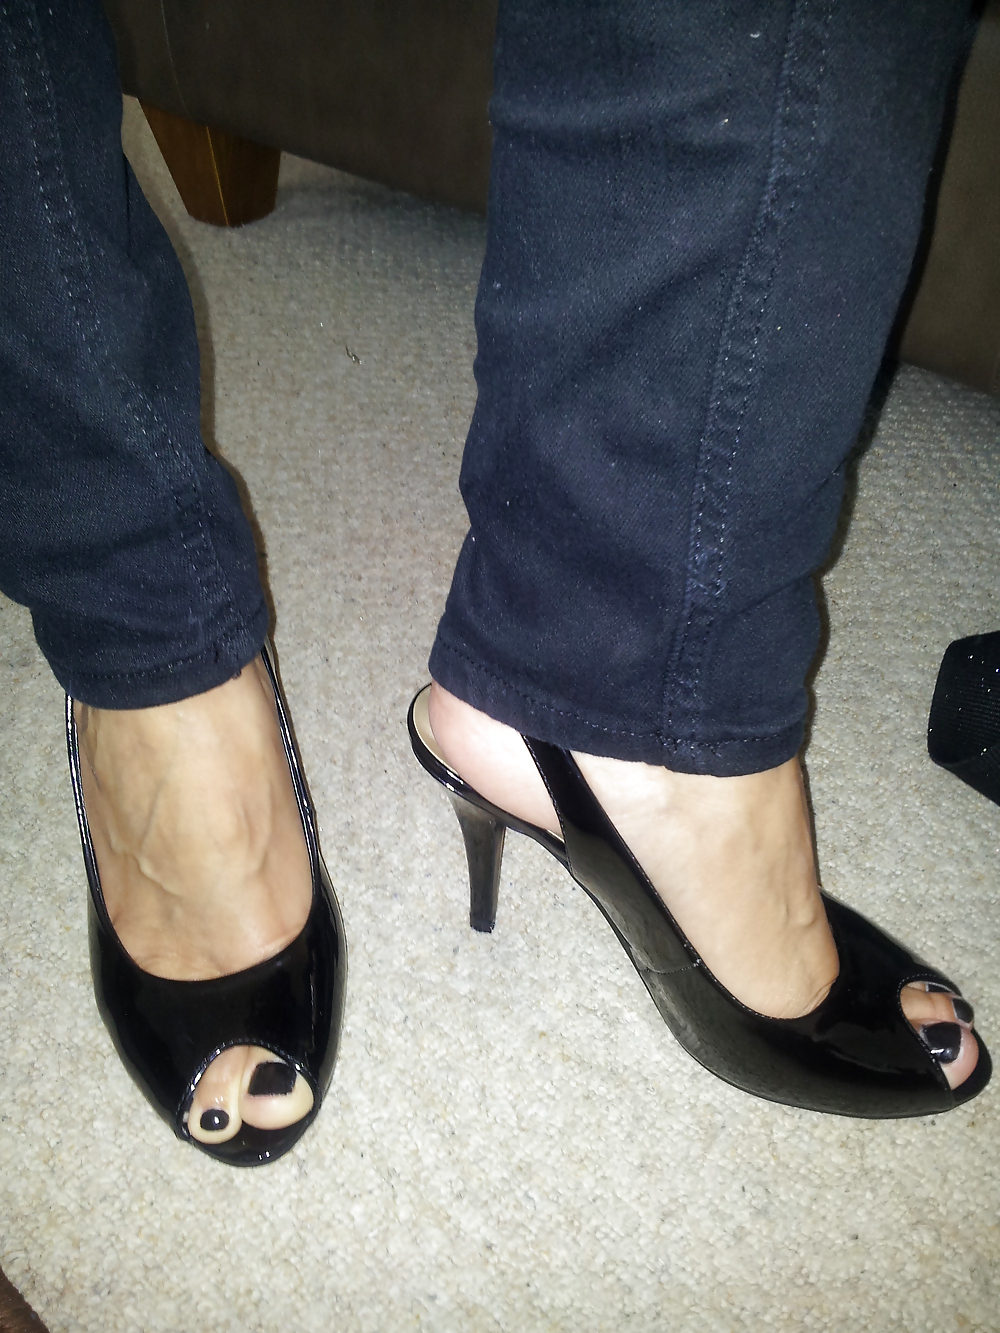 my sexy new peep toe shoes off my man adult photos